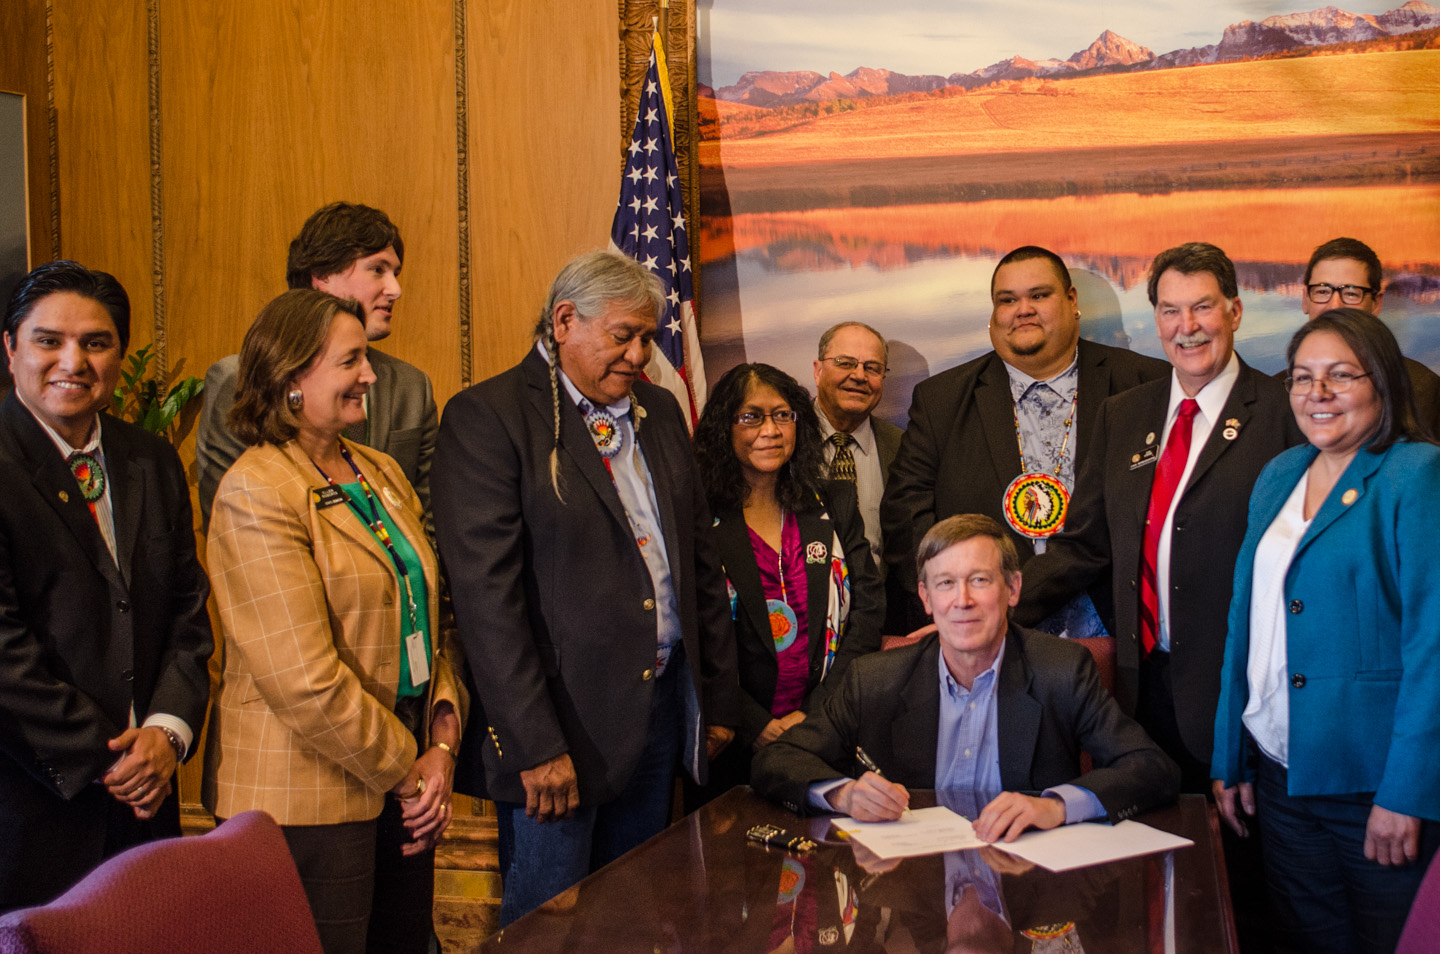 Ute leaders and members of the Colorado Commission of Indian Affairs joined state legislators in Colorado Gov. John Hickenlooper’s office for the signing of HB 13-1198